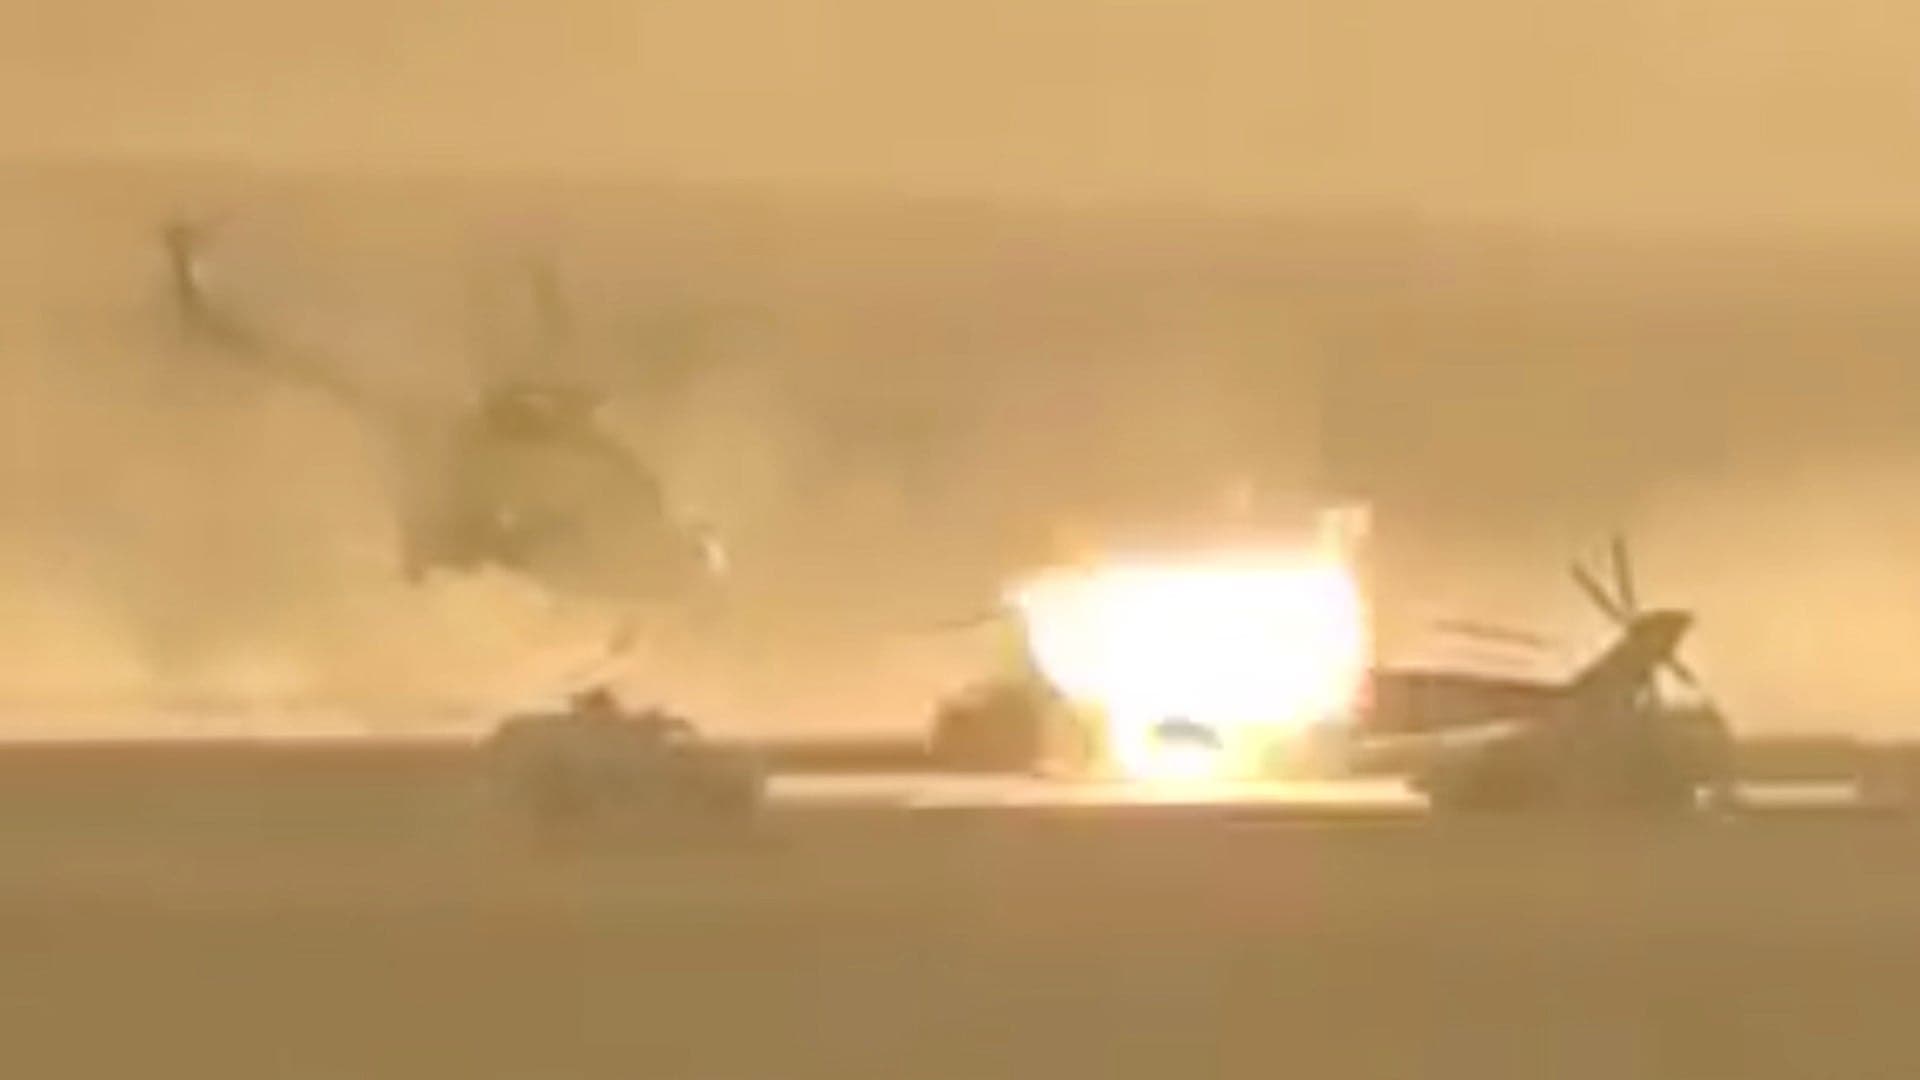 Russian Mi-24 Hind Gets Obliterated after Making an Emergency Landing in Syria